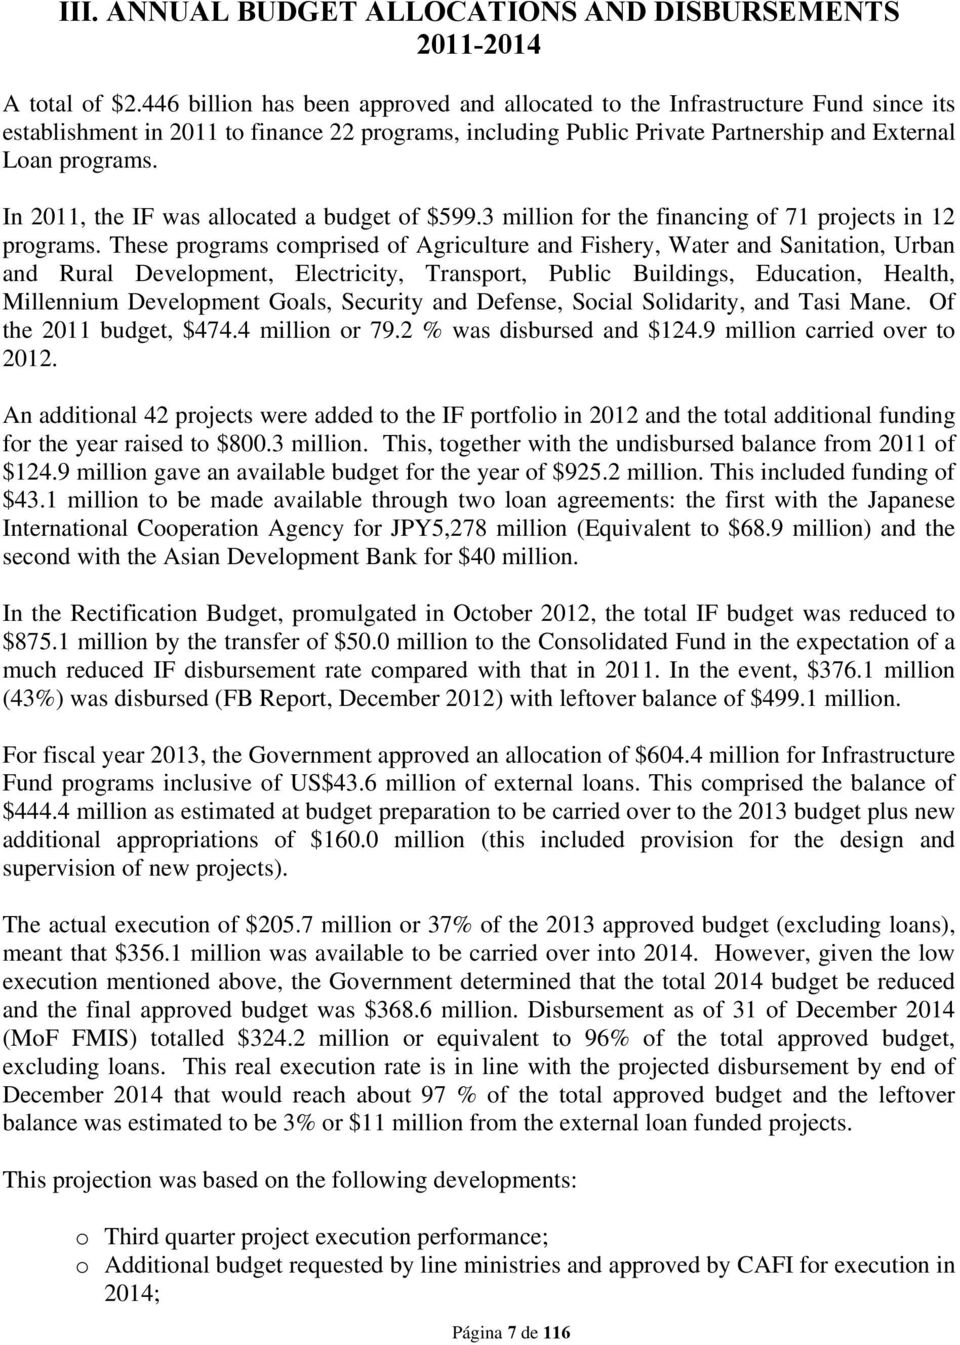 In 2011, the IF was allocated a budget of 599.3 million for the financing of 71 projects in 12 programs.